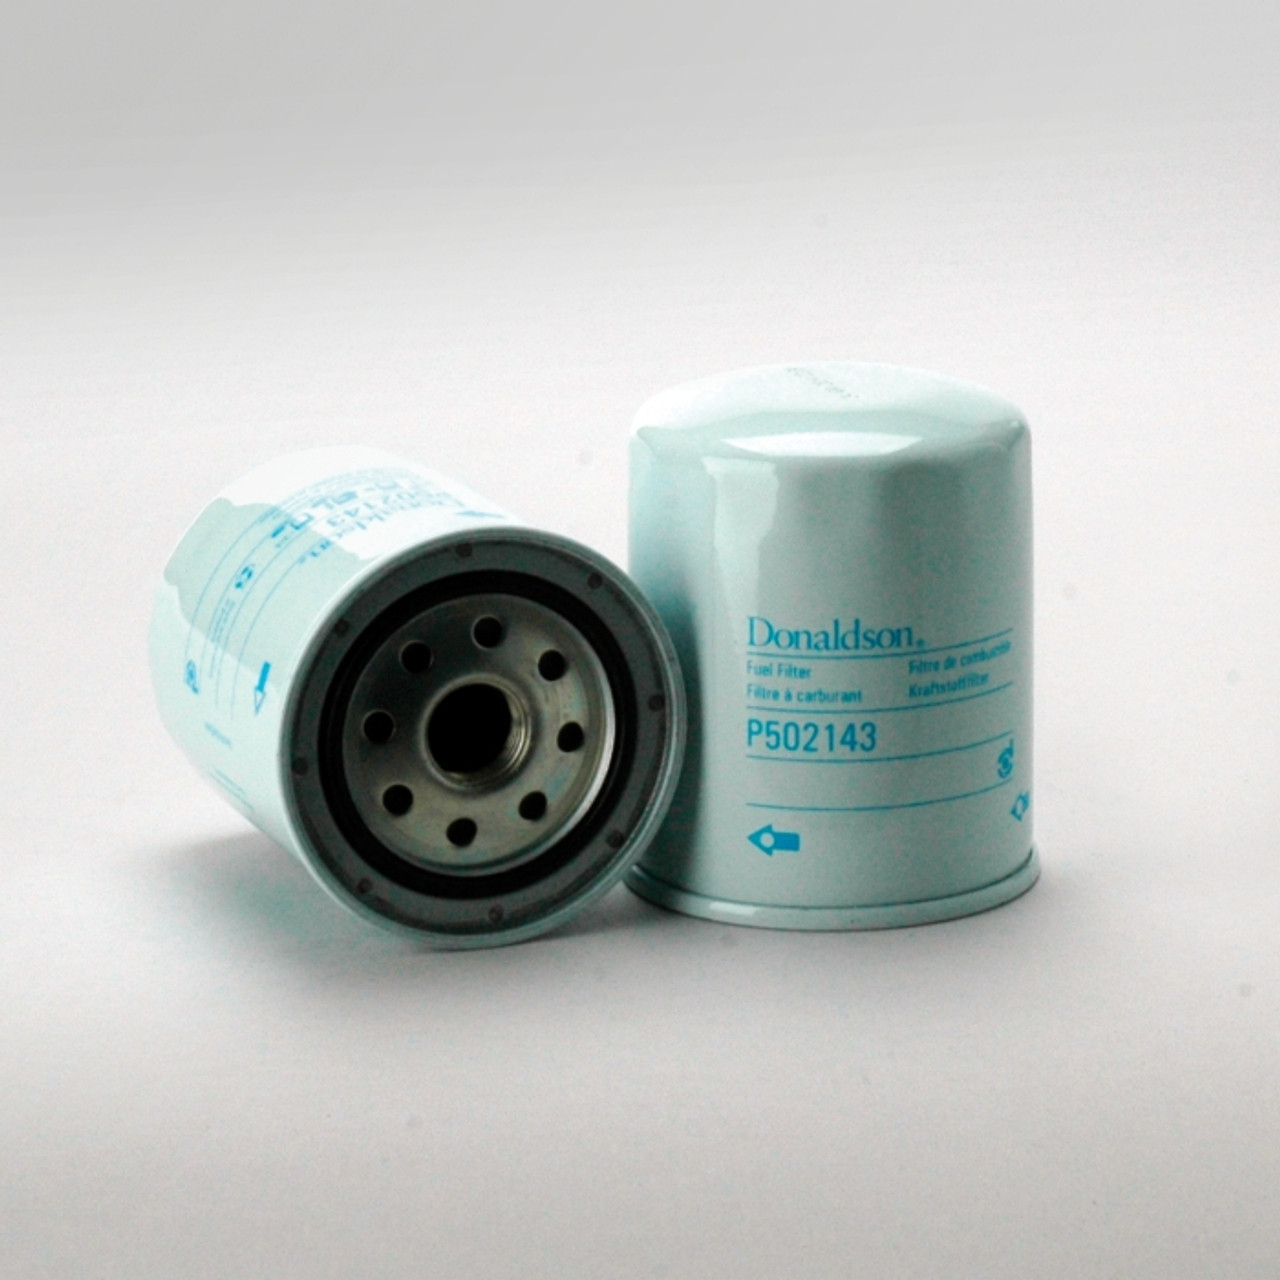 Donaldson P502143 Fuel Filter- Spin-on